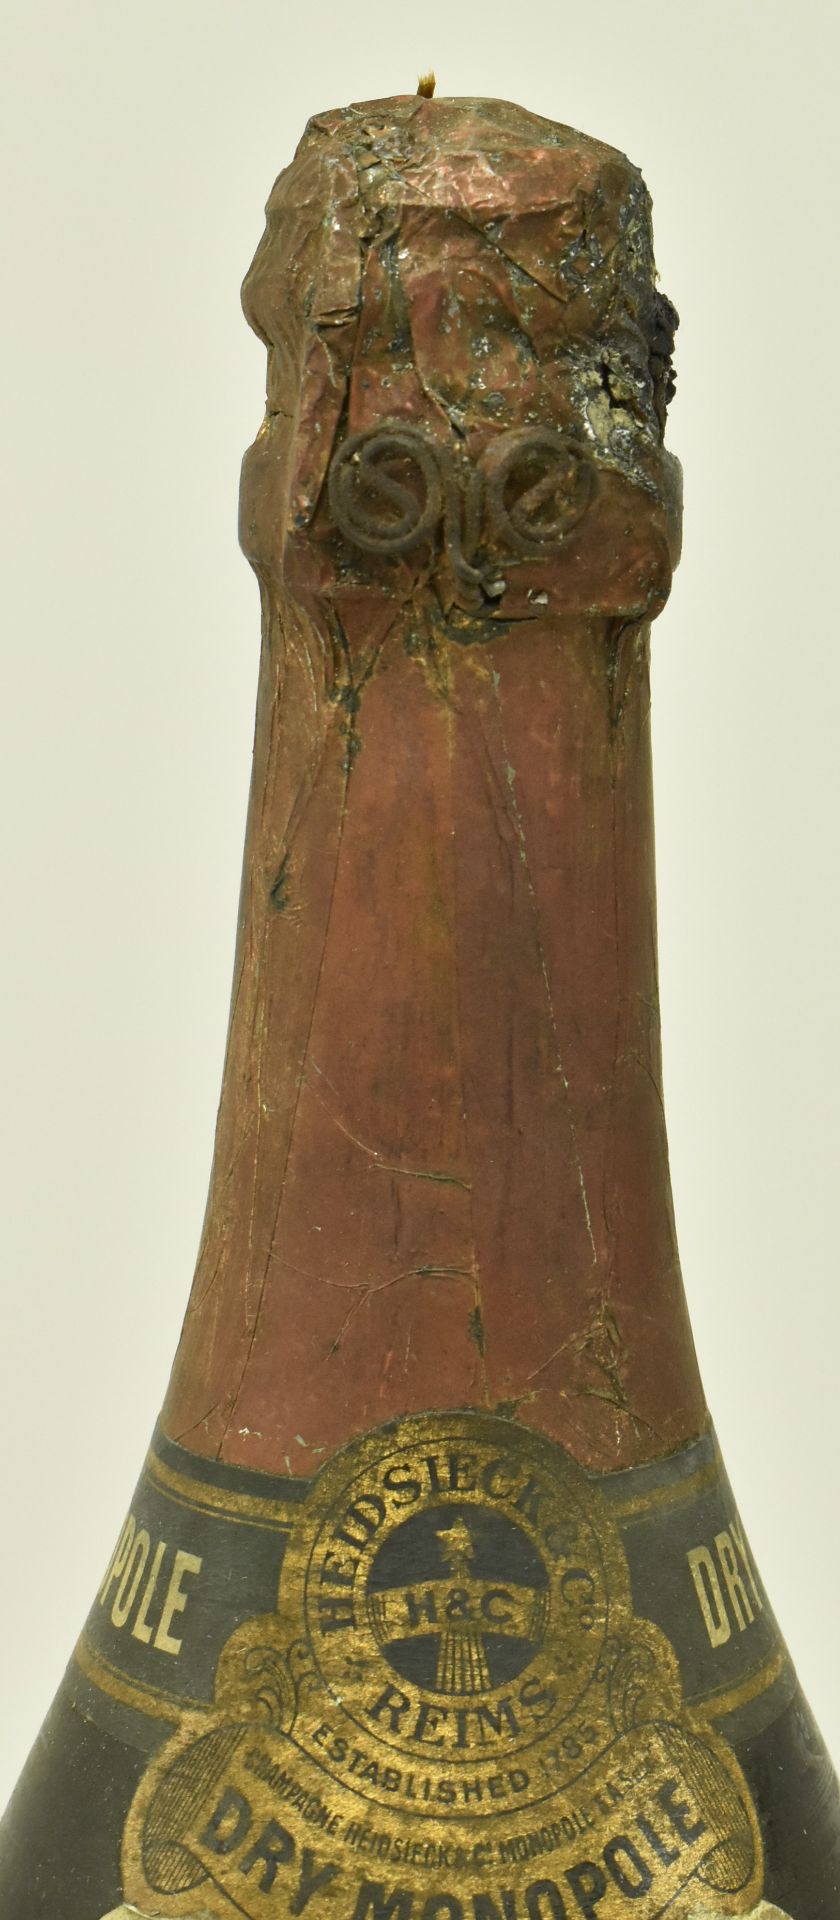 HEIDSIECK & CO REIMS - 1929 DRY MONOPOLE CHAMPAGNE BOTTLE - Image 3 of 6